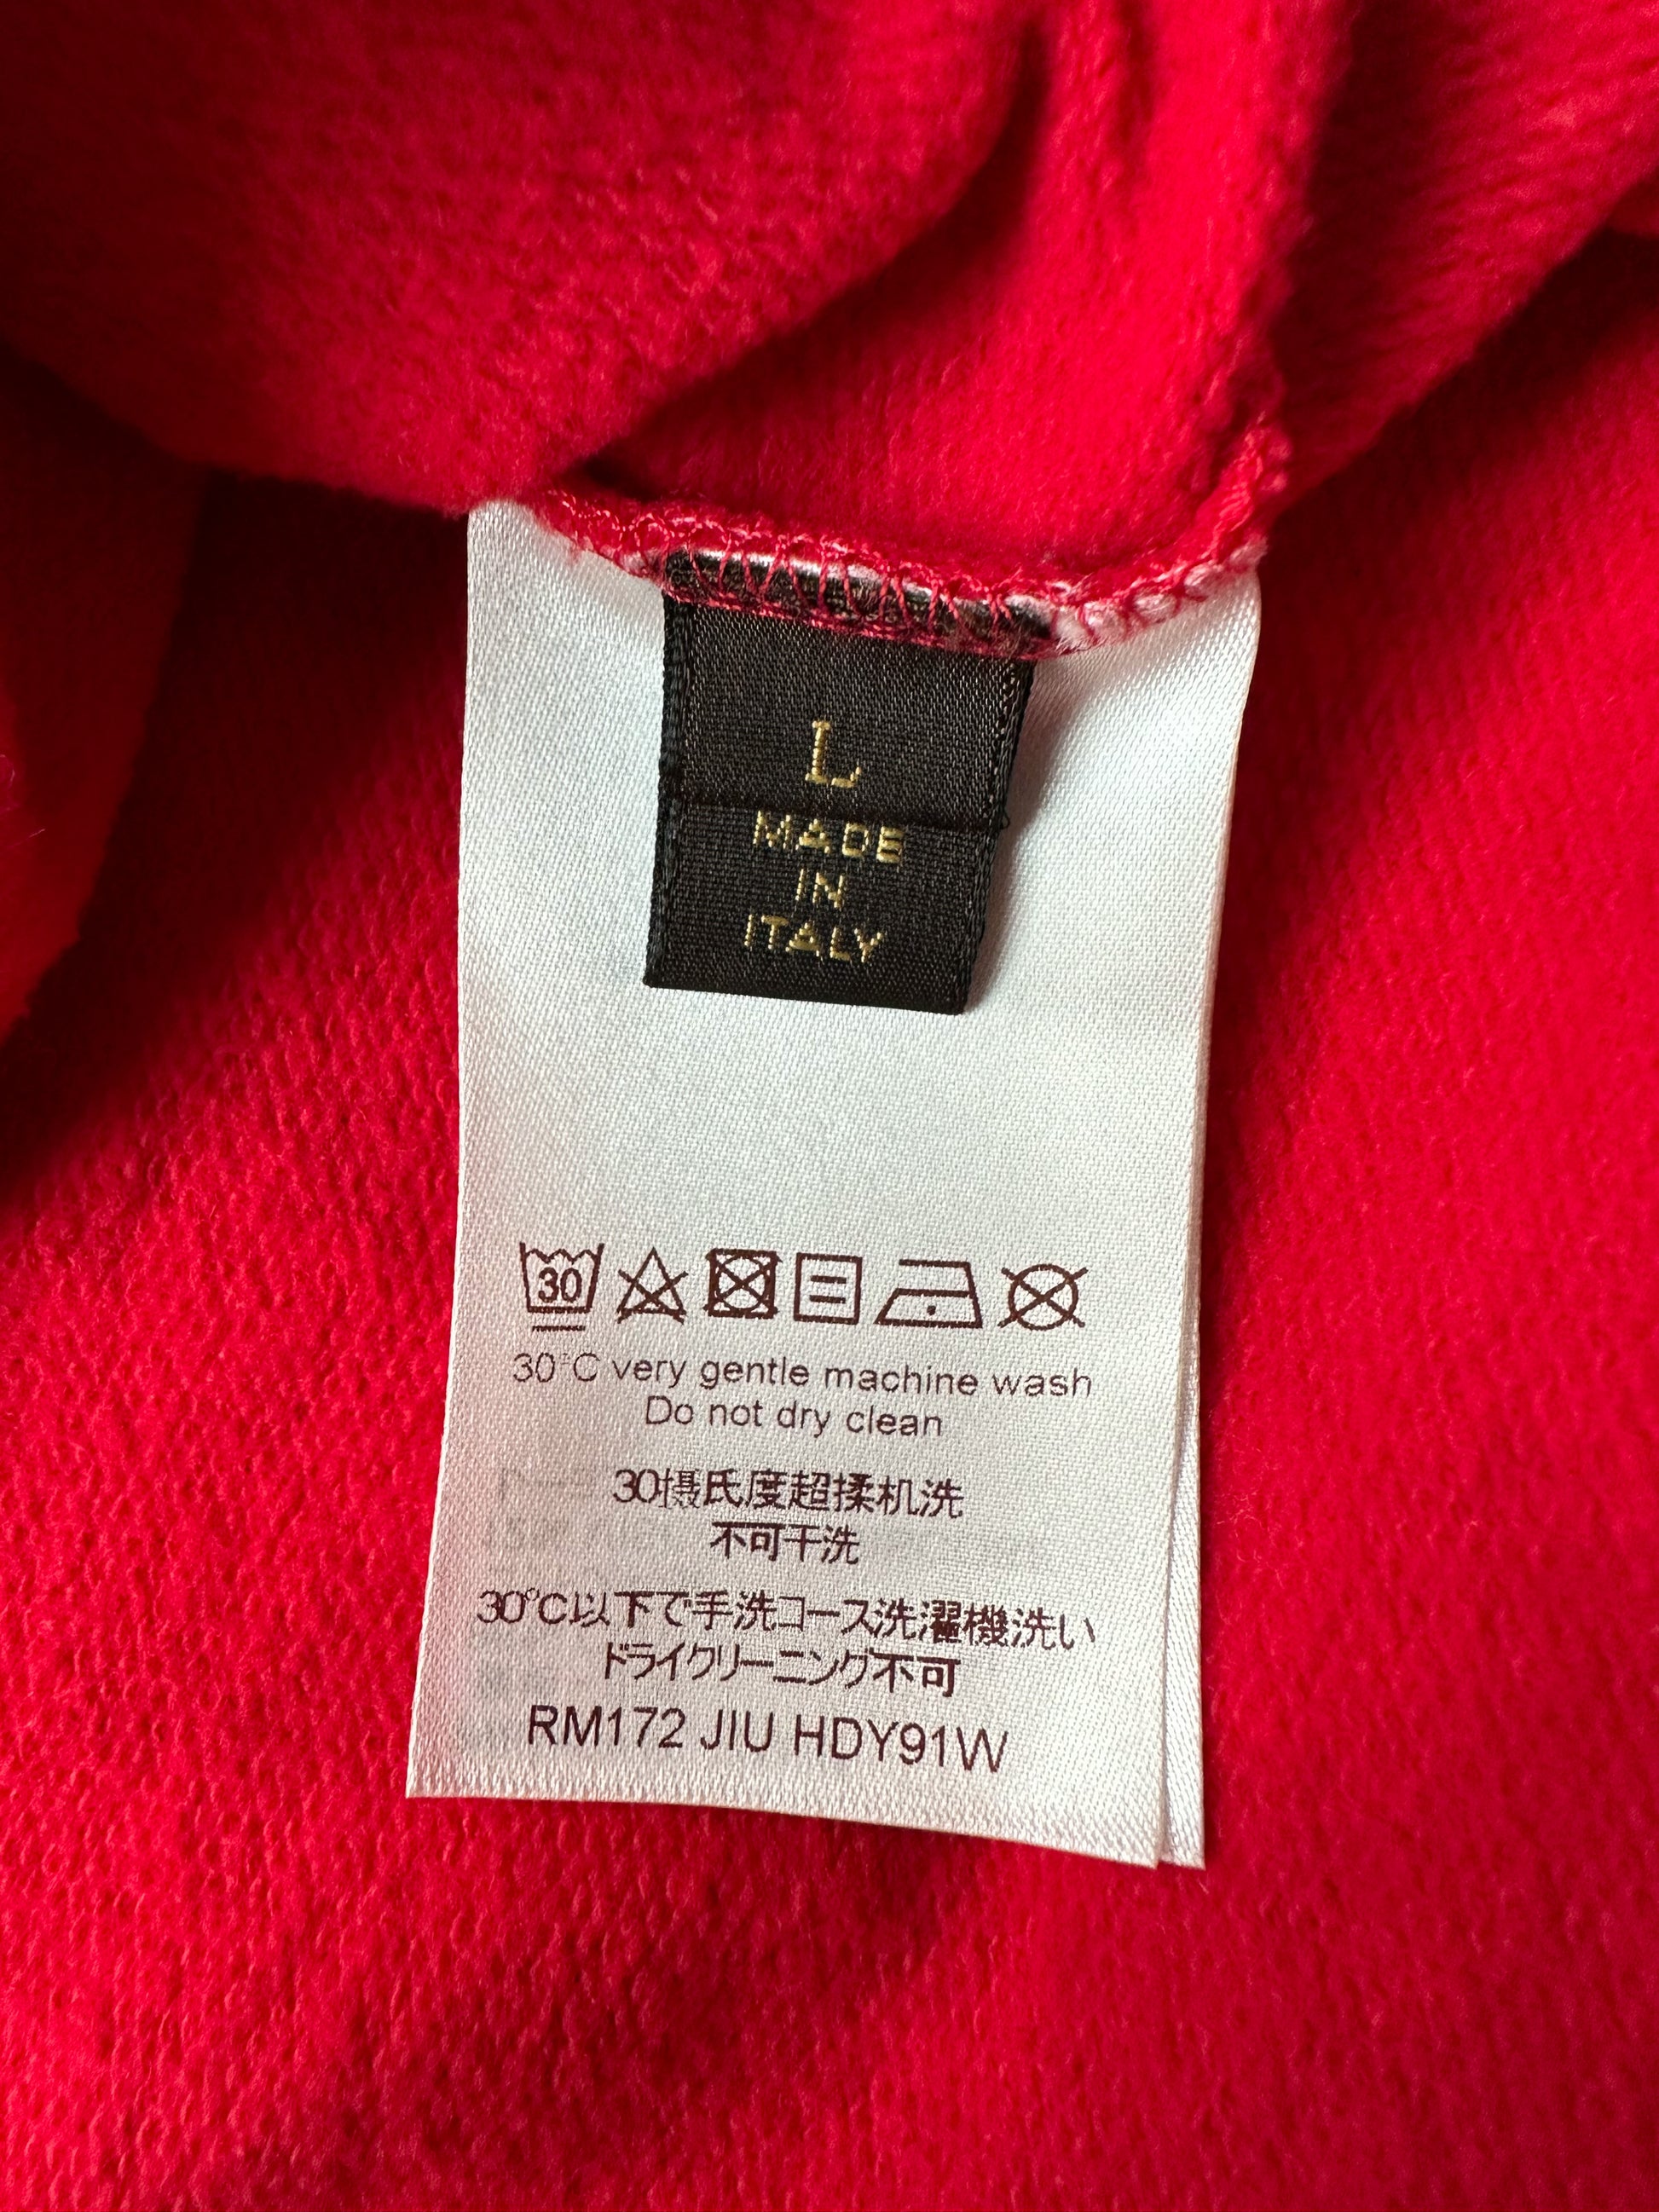 supreme louis vuitton hoodie red